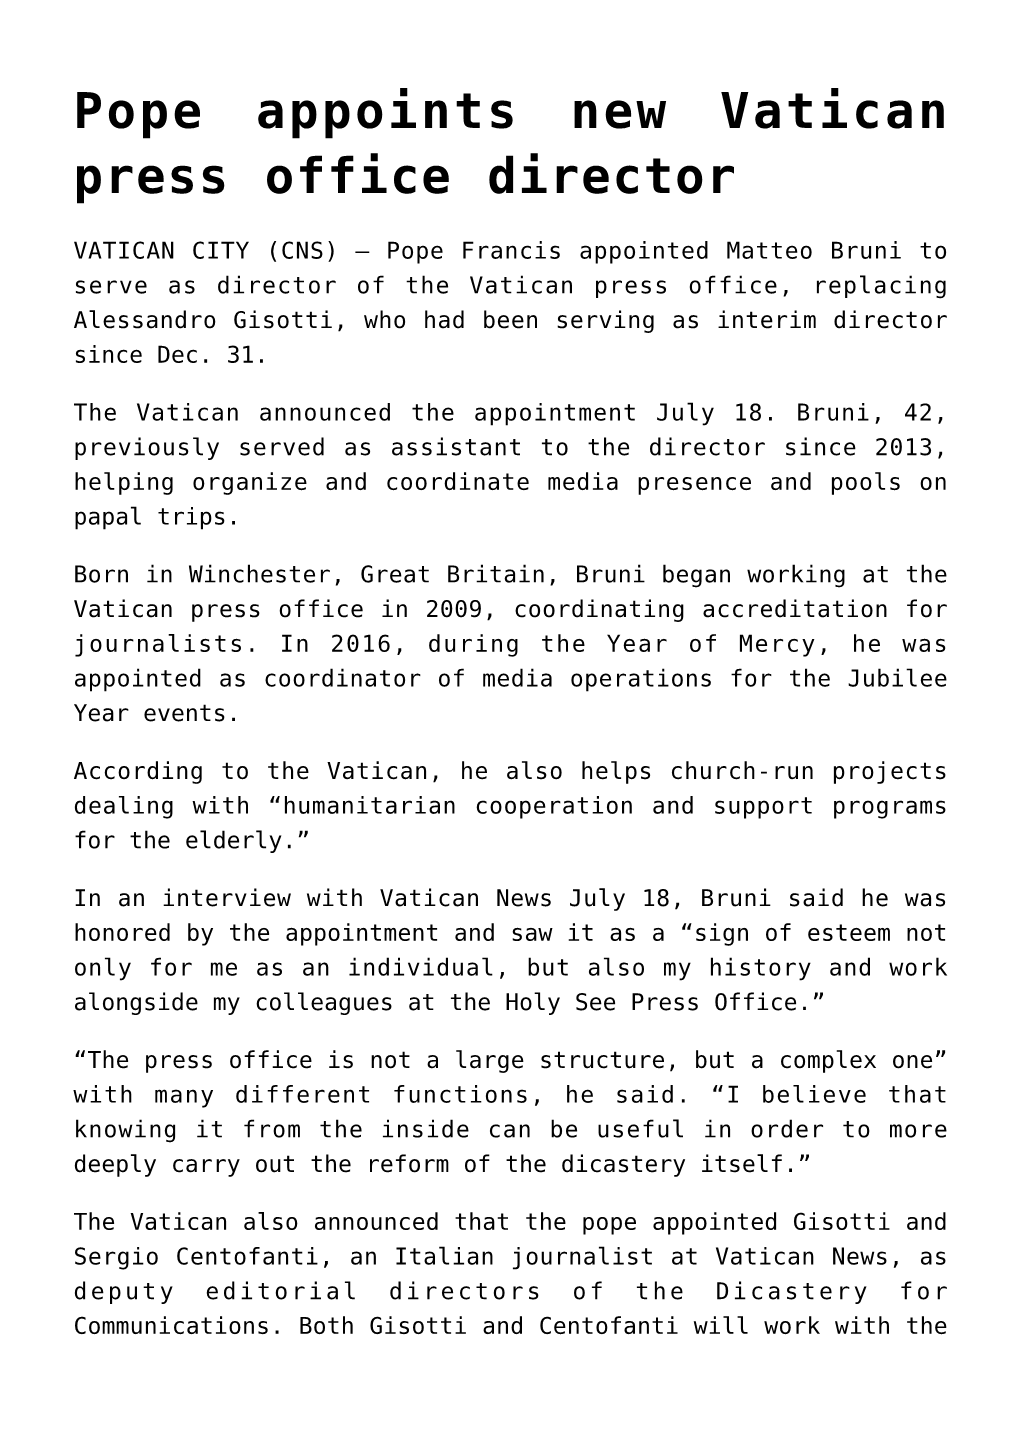 Pope Appoints New Vatican Press Office Director